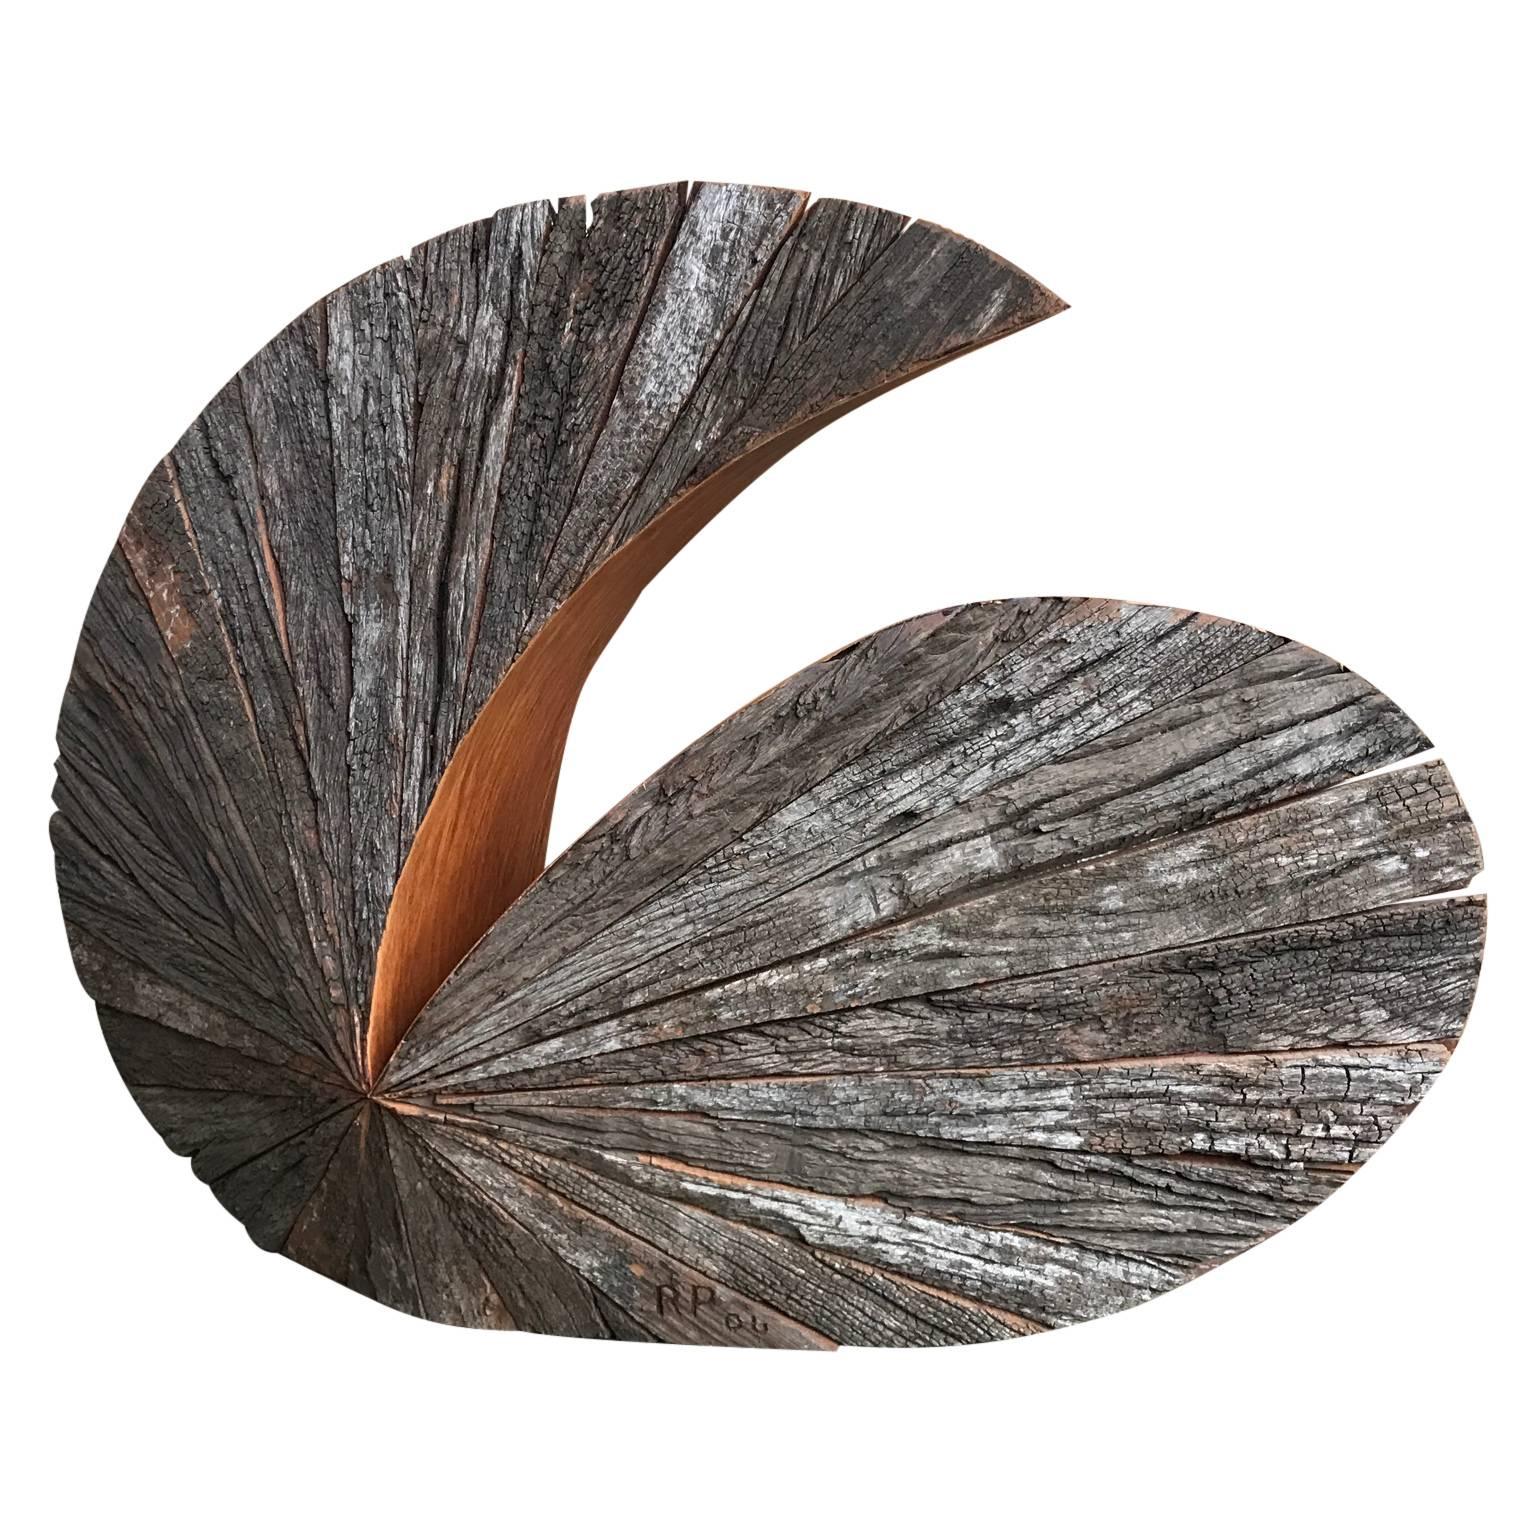 Ricardo Pascale Abstract Sculpture - Organic Swirl Shaped Wooden Sculpture